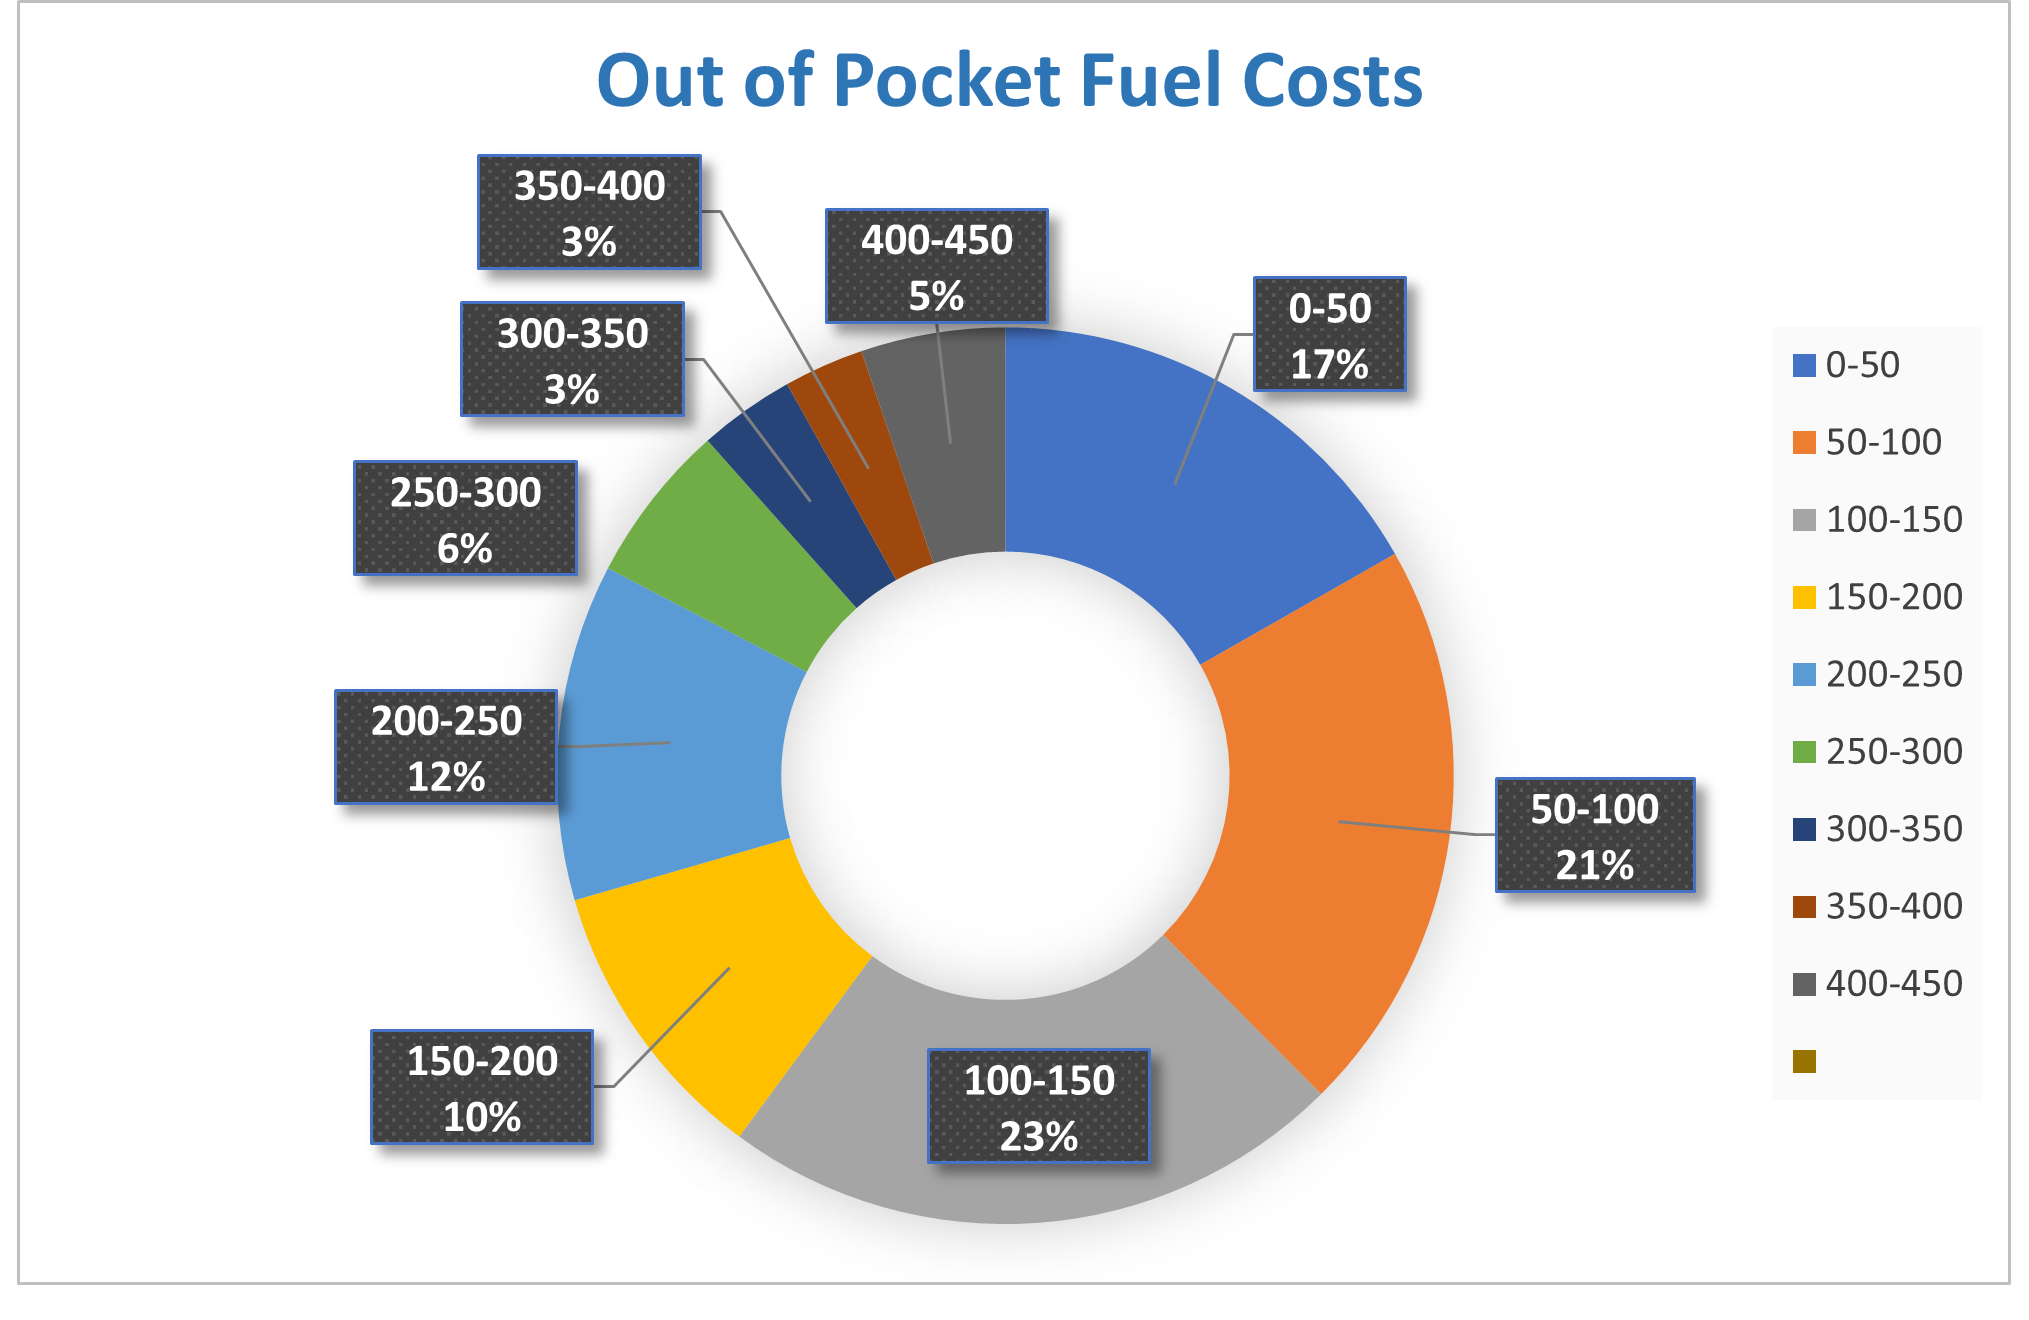 Out of pocket fuel costs